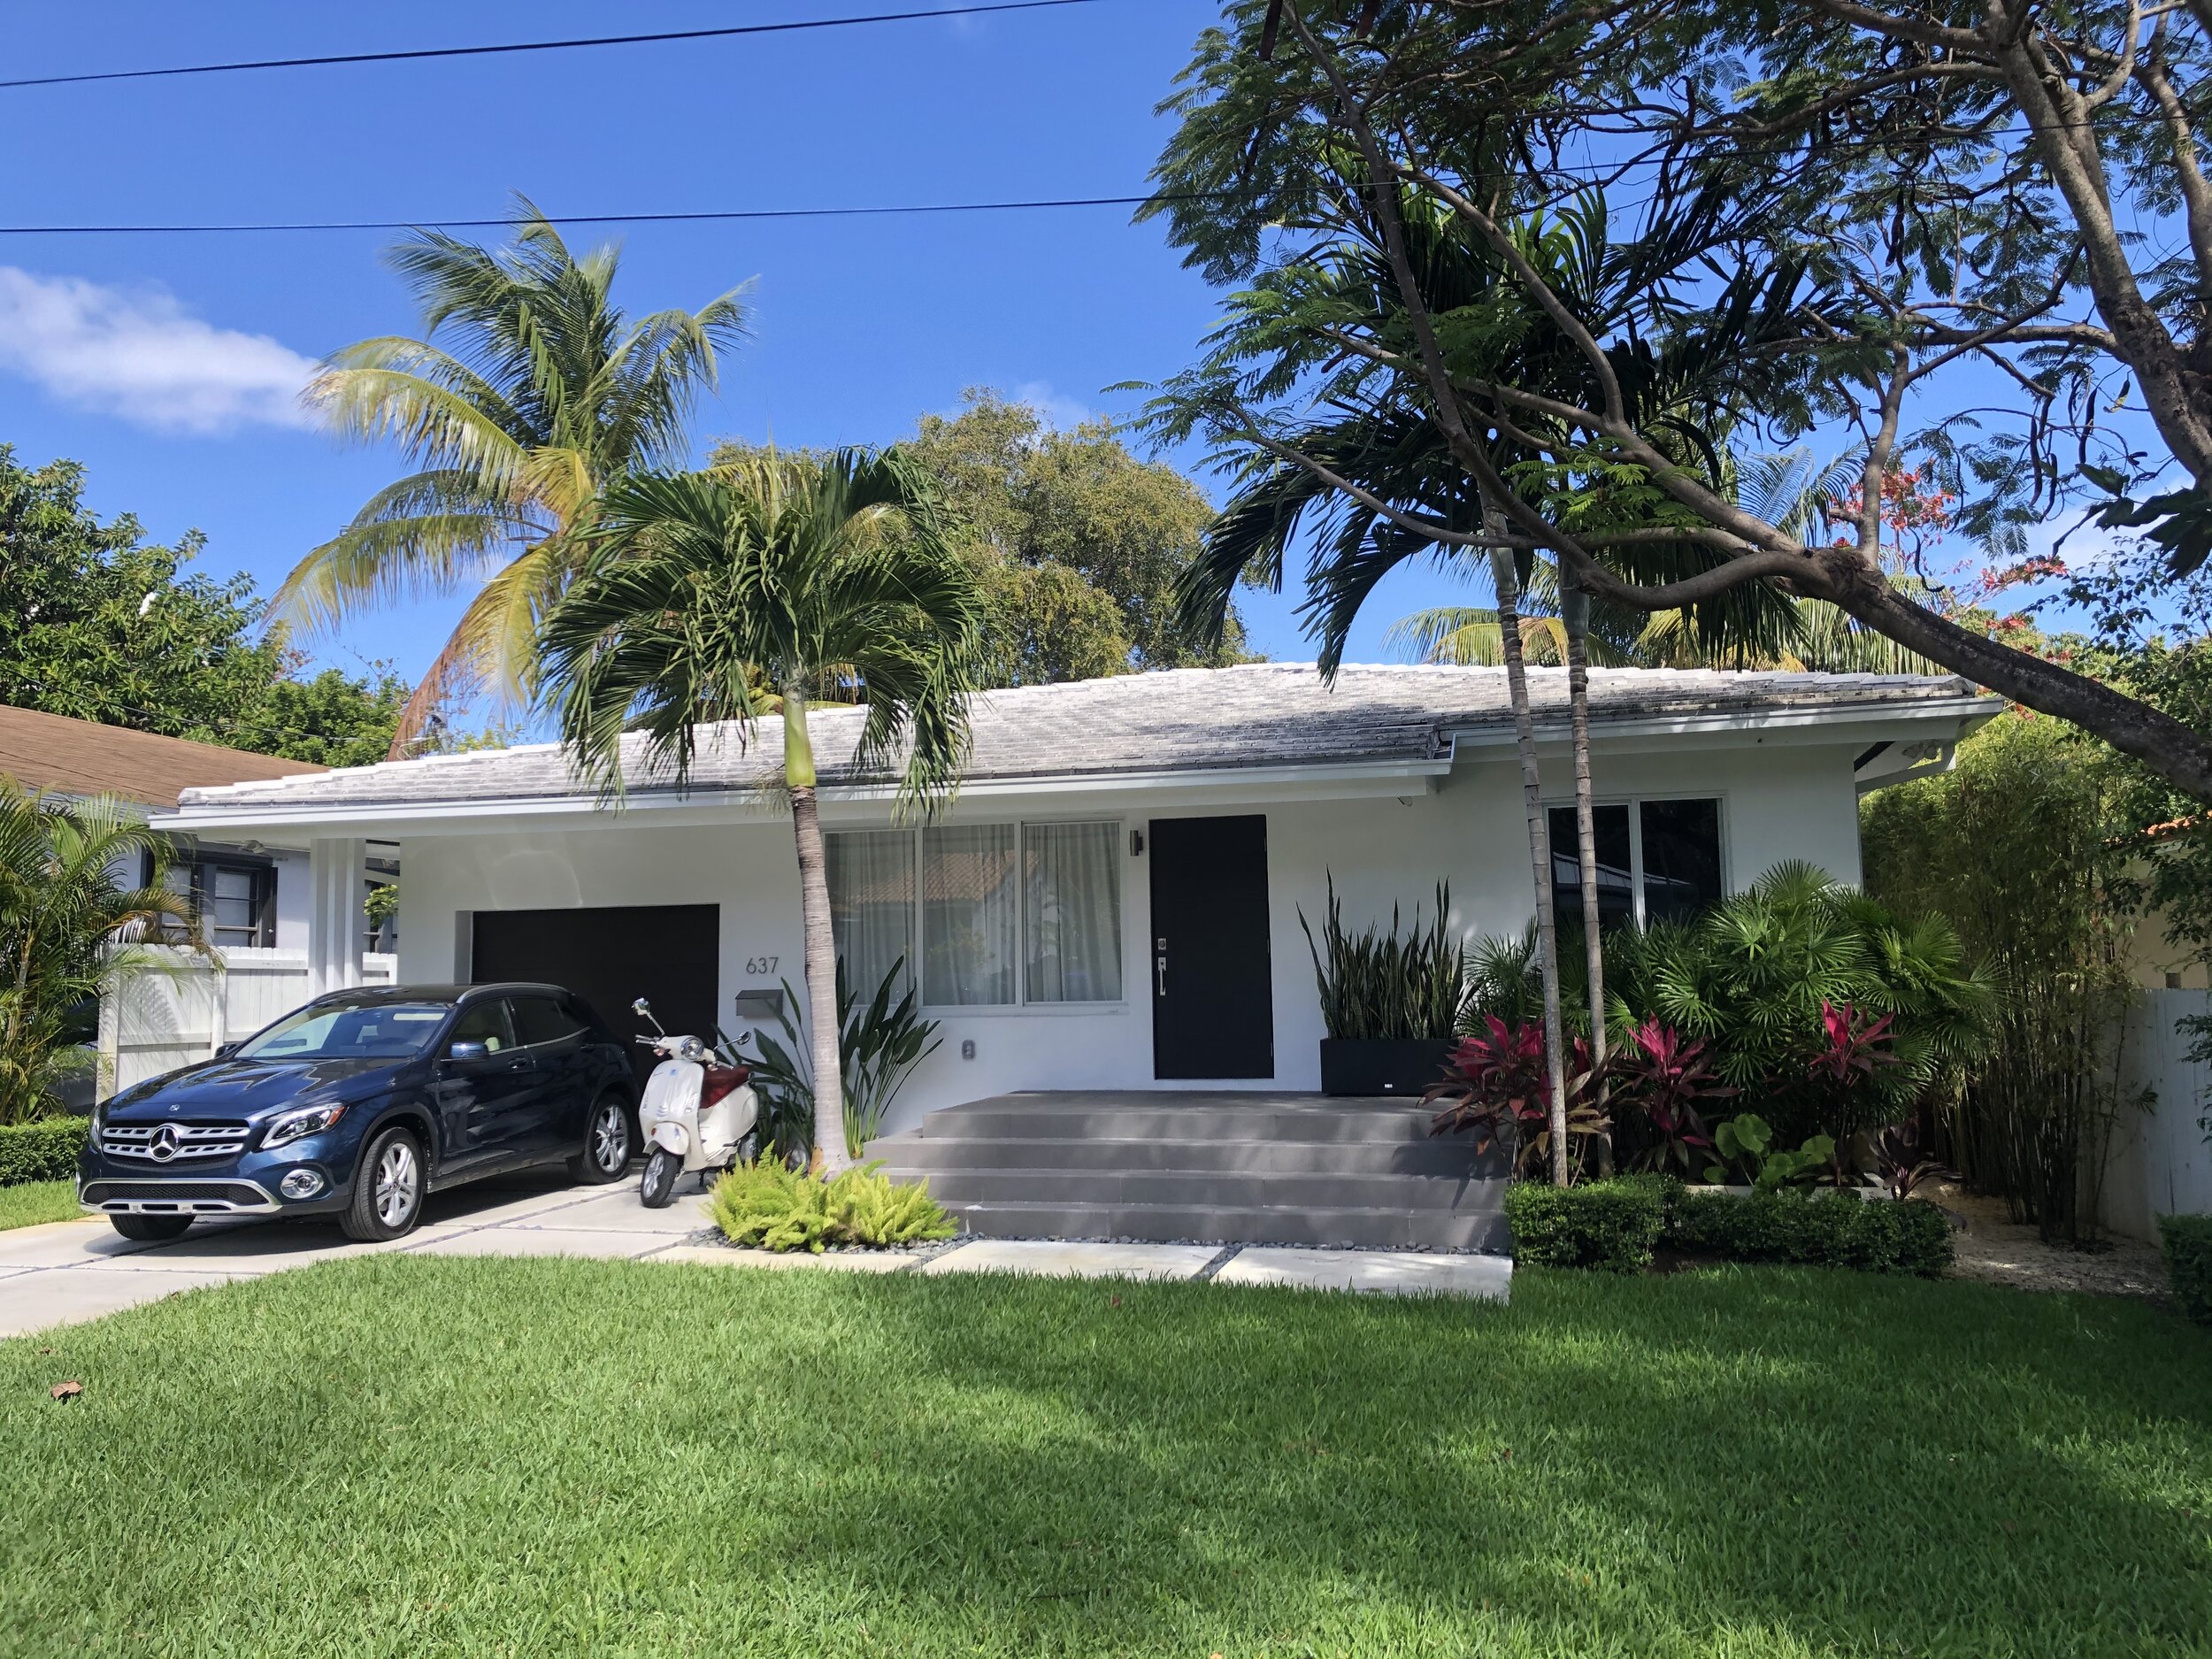 Starter Home in Historic Bayside in MiMo district in Miami